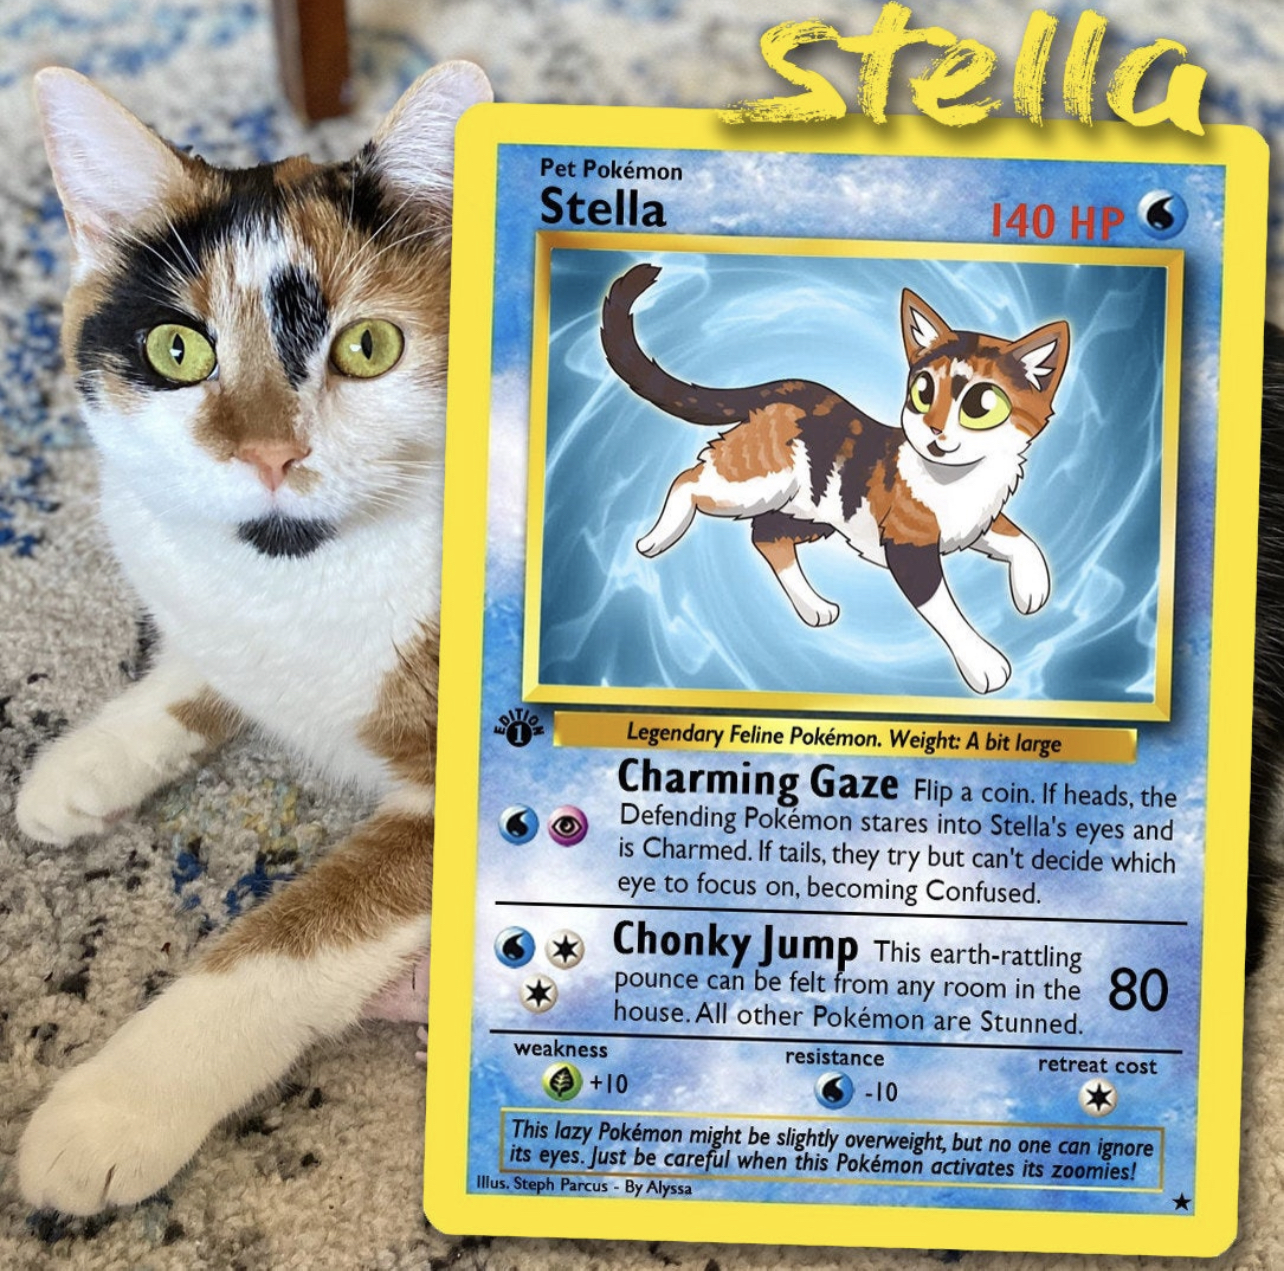 fauna - Stella Pet Pokmon Stella 140 He Legendary Feline Pokmon. Weight A bit large Charming Gaze Flip a coin. If heads, the Defending Pokemon stares into Stella's eyes and is Charmed. If tails, they try but can't decide which eye to focus on, becoming Co